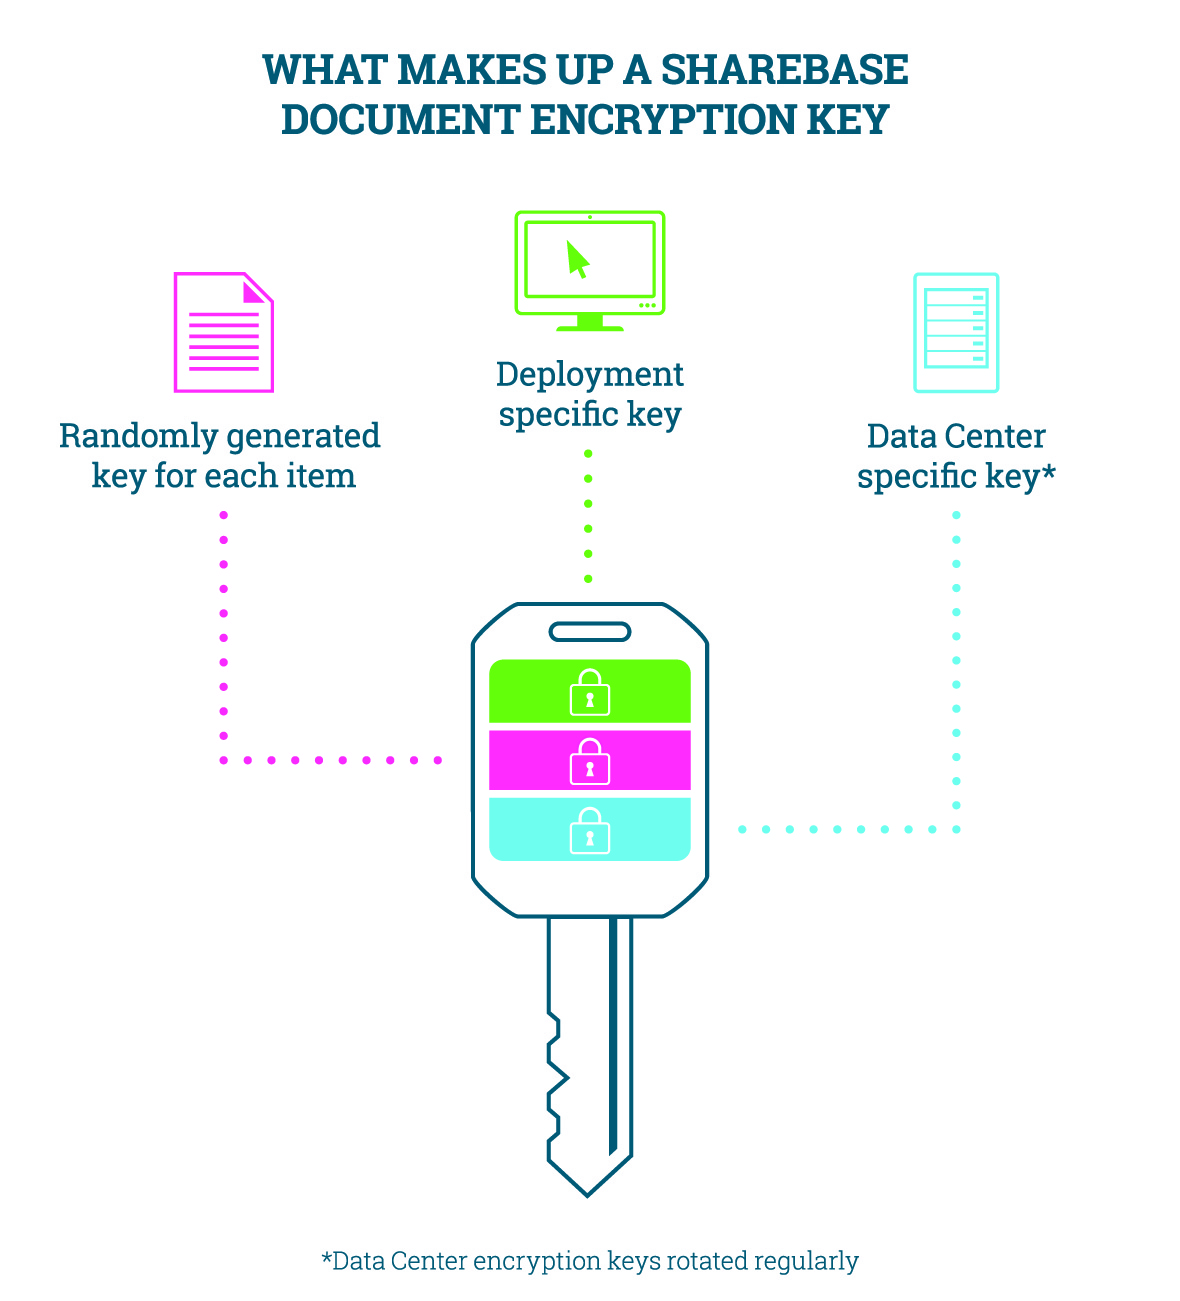 Every encryption key is encrypted